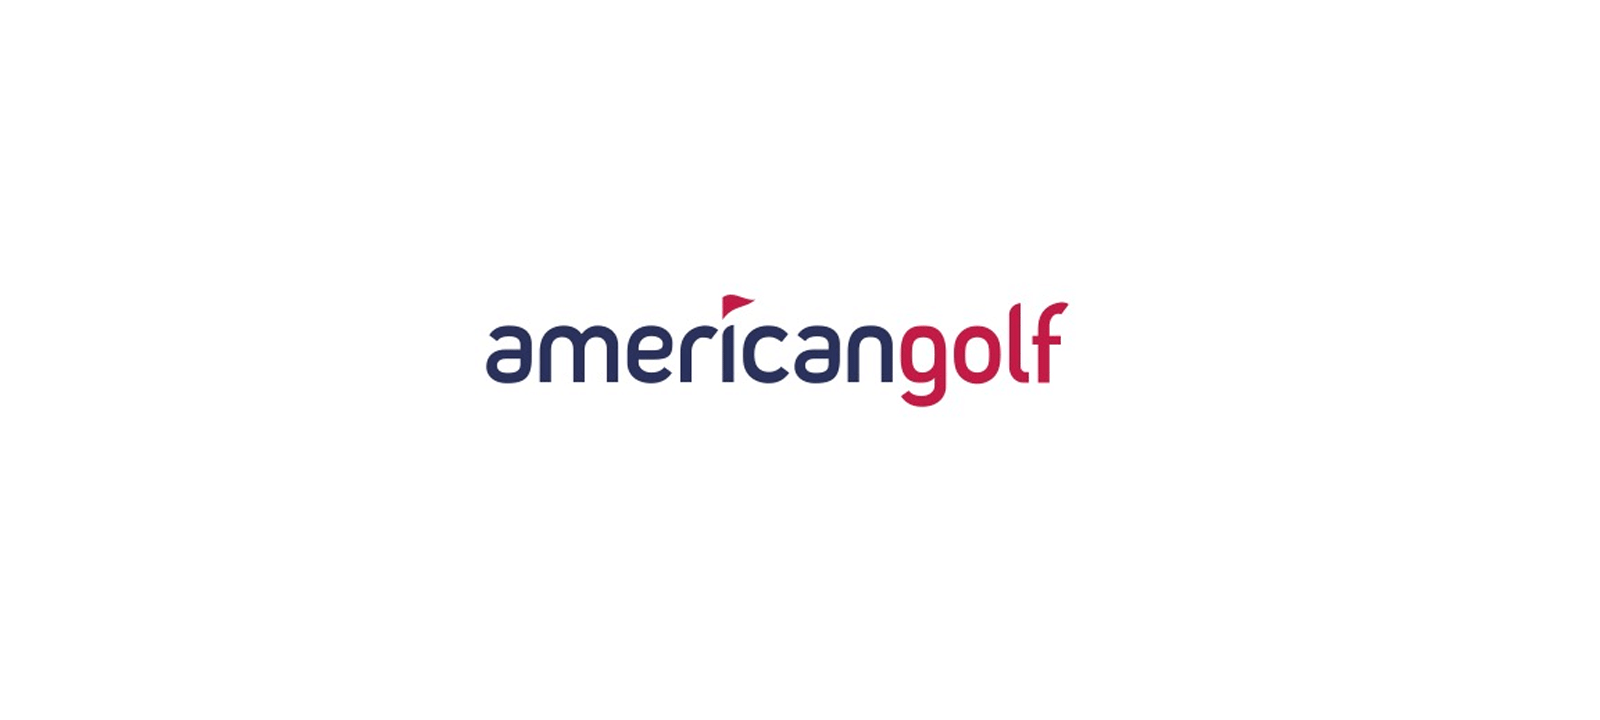 England and Wales Blind Golf are pleased to announce a new partnership with American Golf, the UK's largest golf retailer